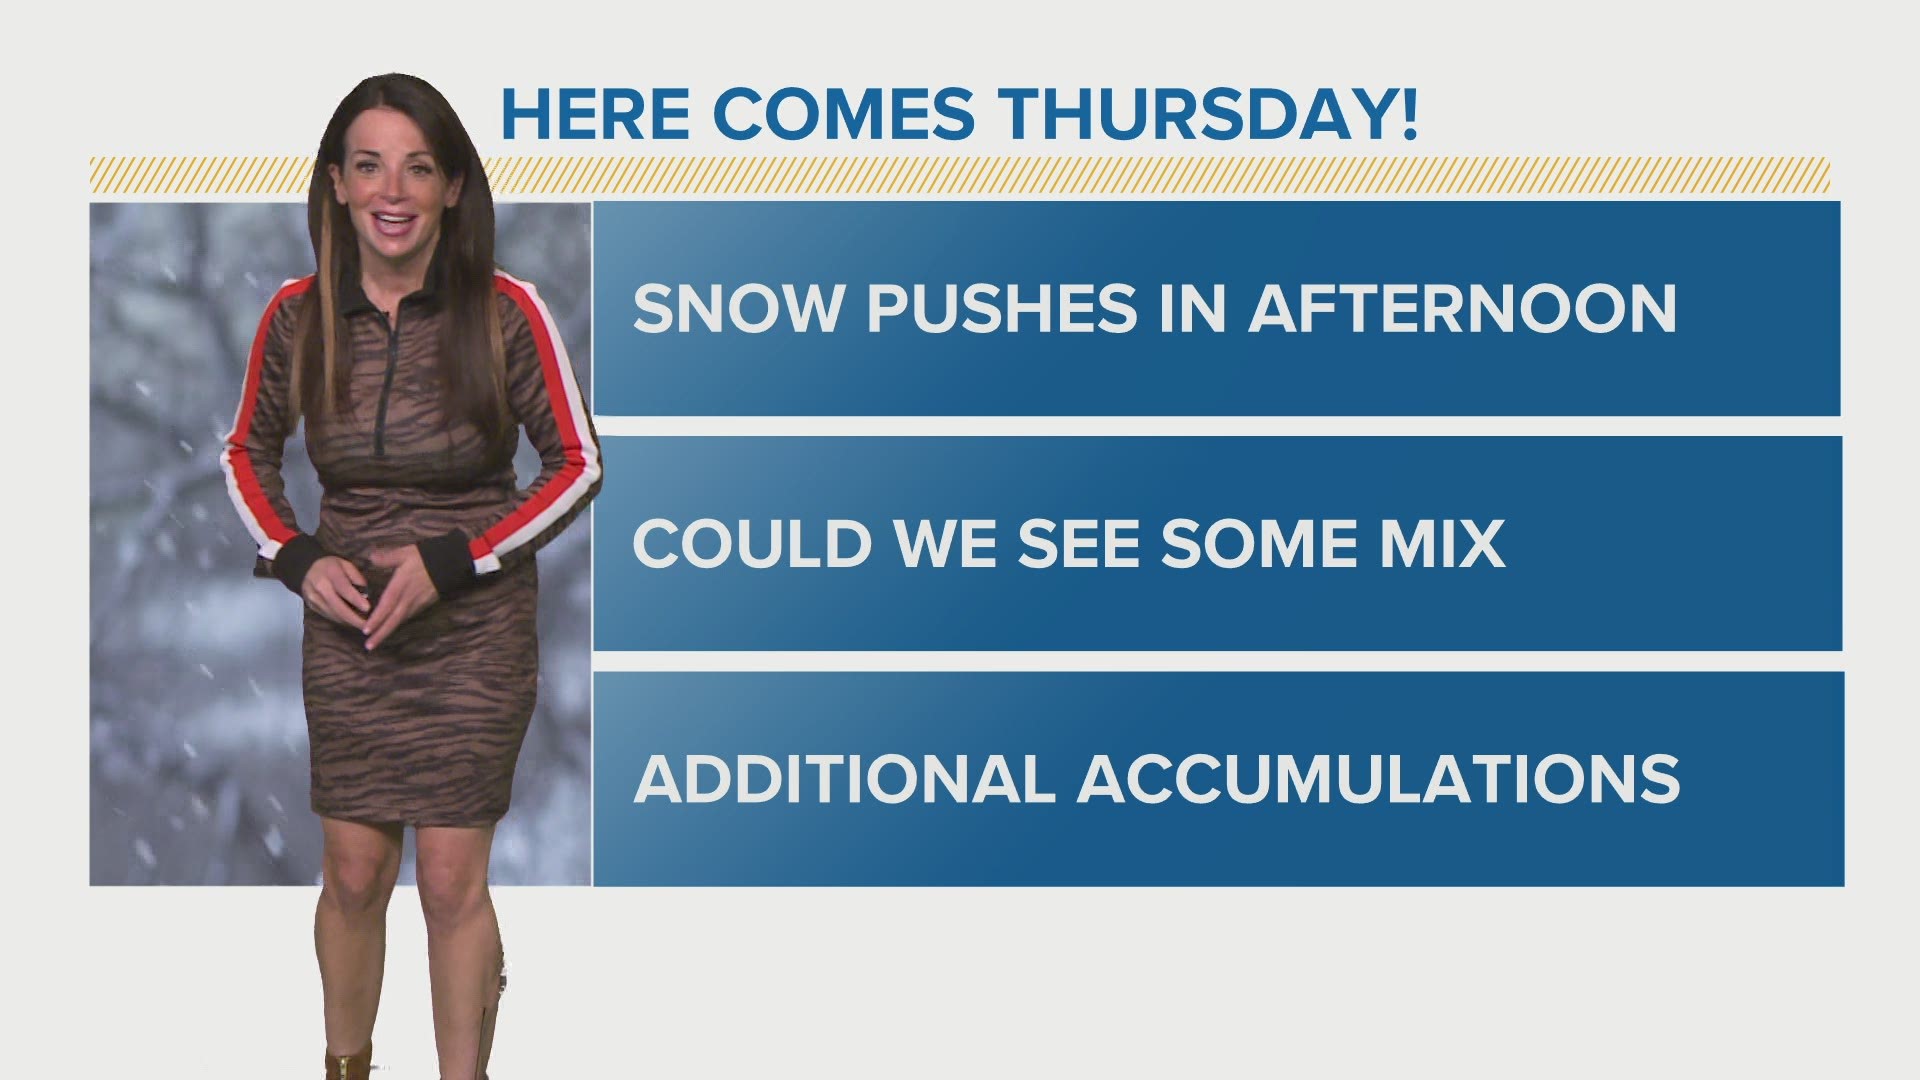 We're tracking frigid temperatures and more snow in the days ahead. Hollie Strano has the hour-by-hour details in her morning weather forecast for February 16, 2021.